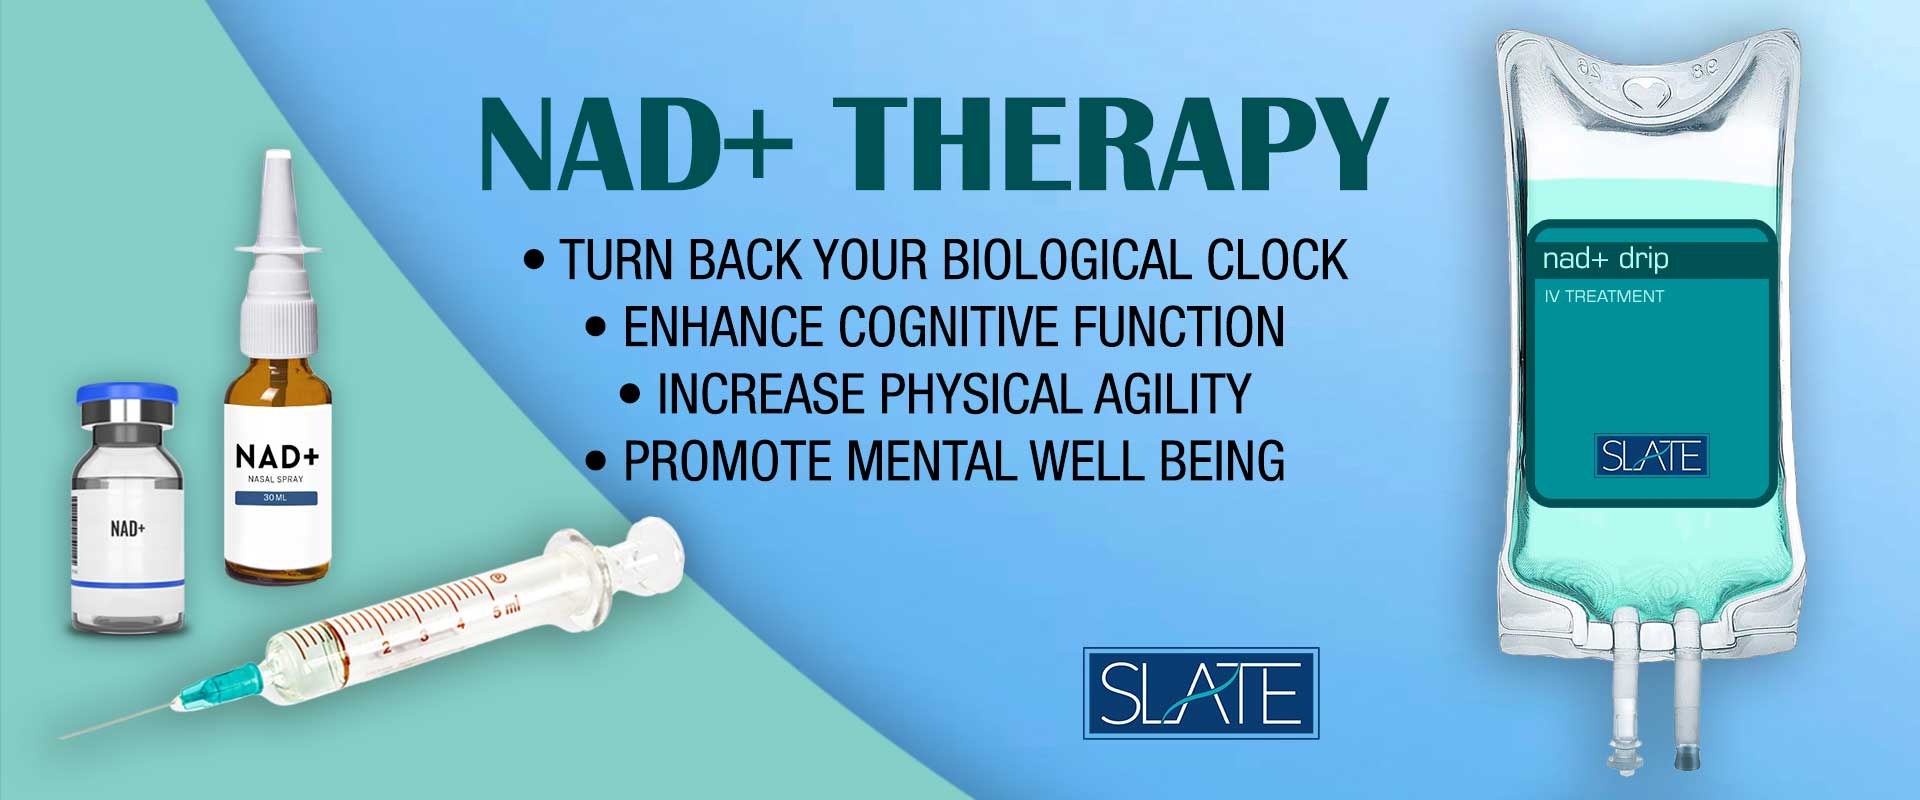 nad-therapy-banner-v3